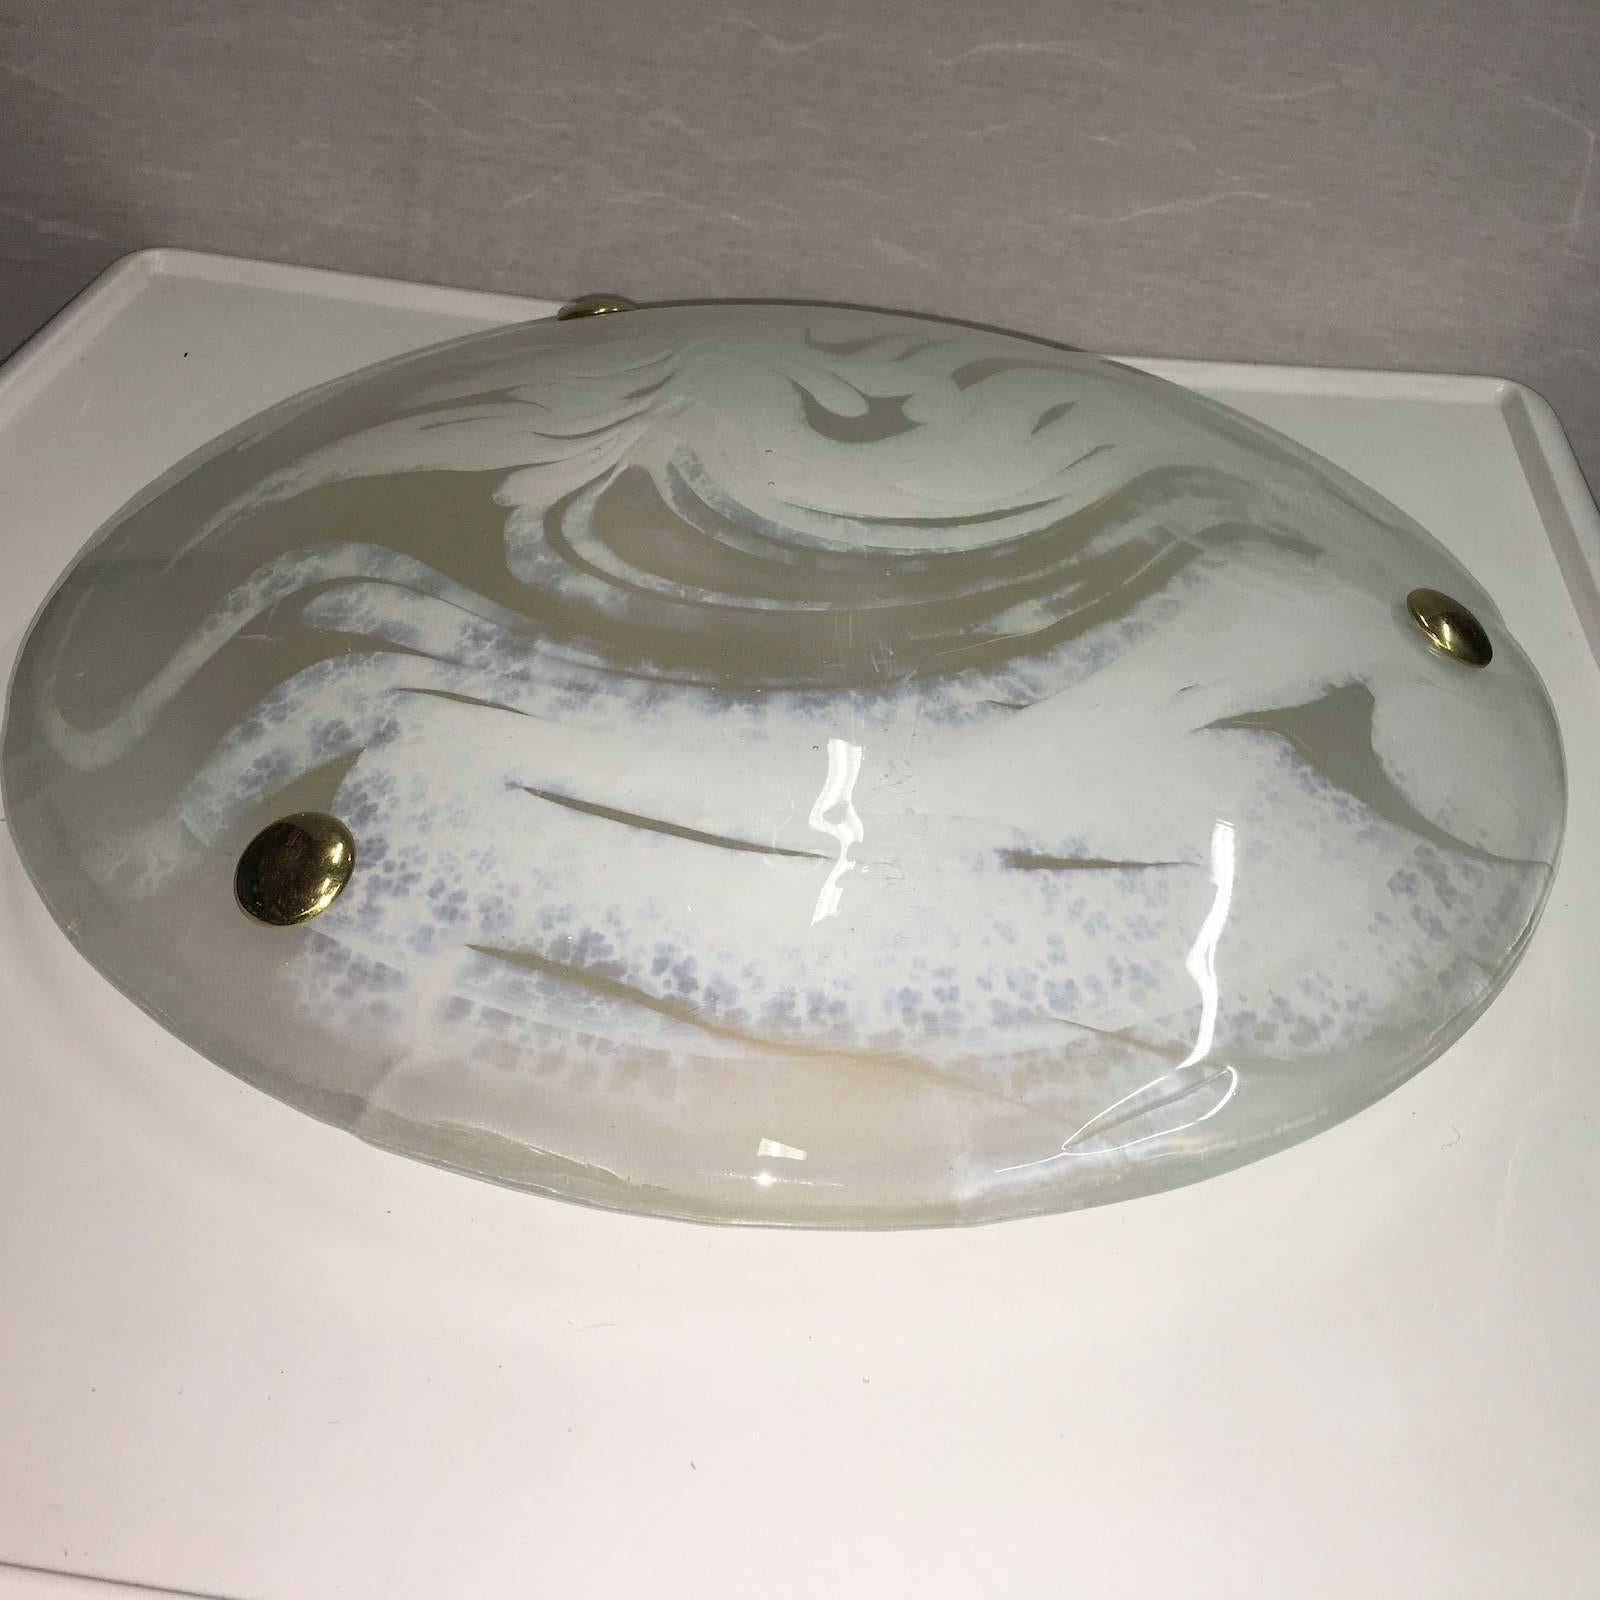 Beautiful white and clear swirl glass flush mount by Hillebrand of Germany. Made of heavy and very thick glass, with brass back plate.

Takes three E 14 base bulbs up to 40 watts per bulb.